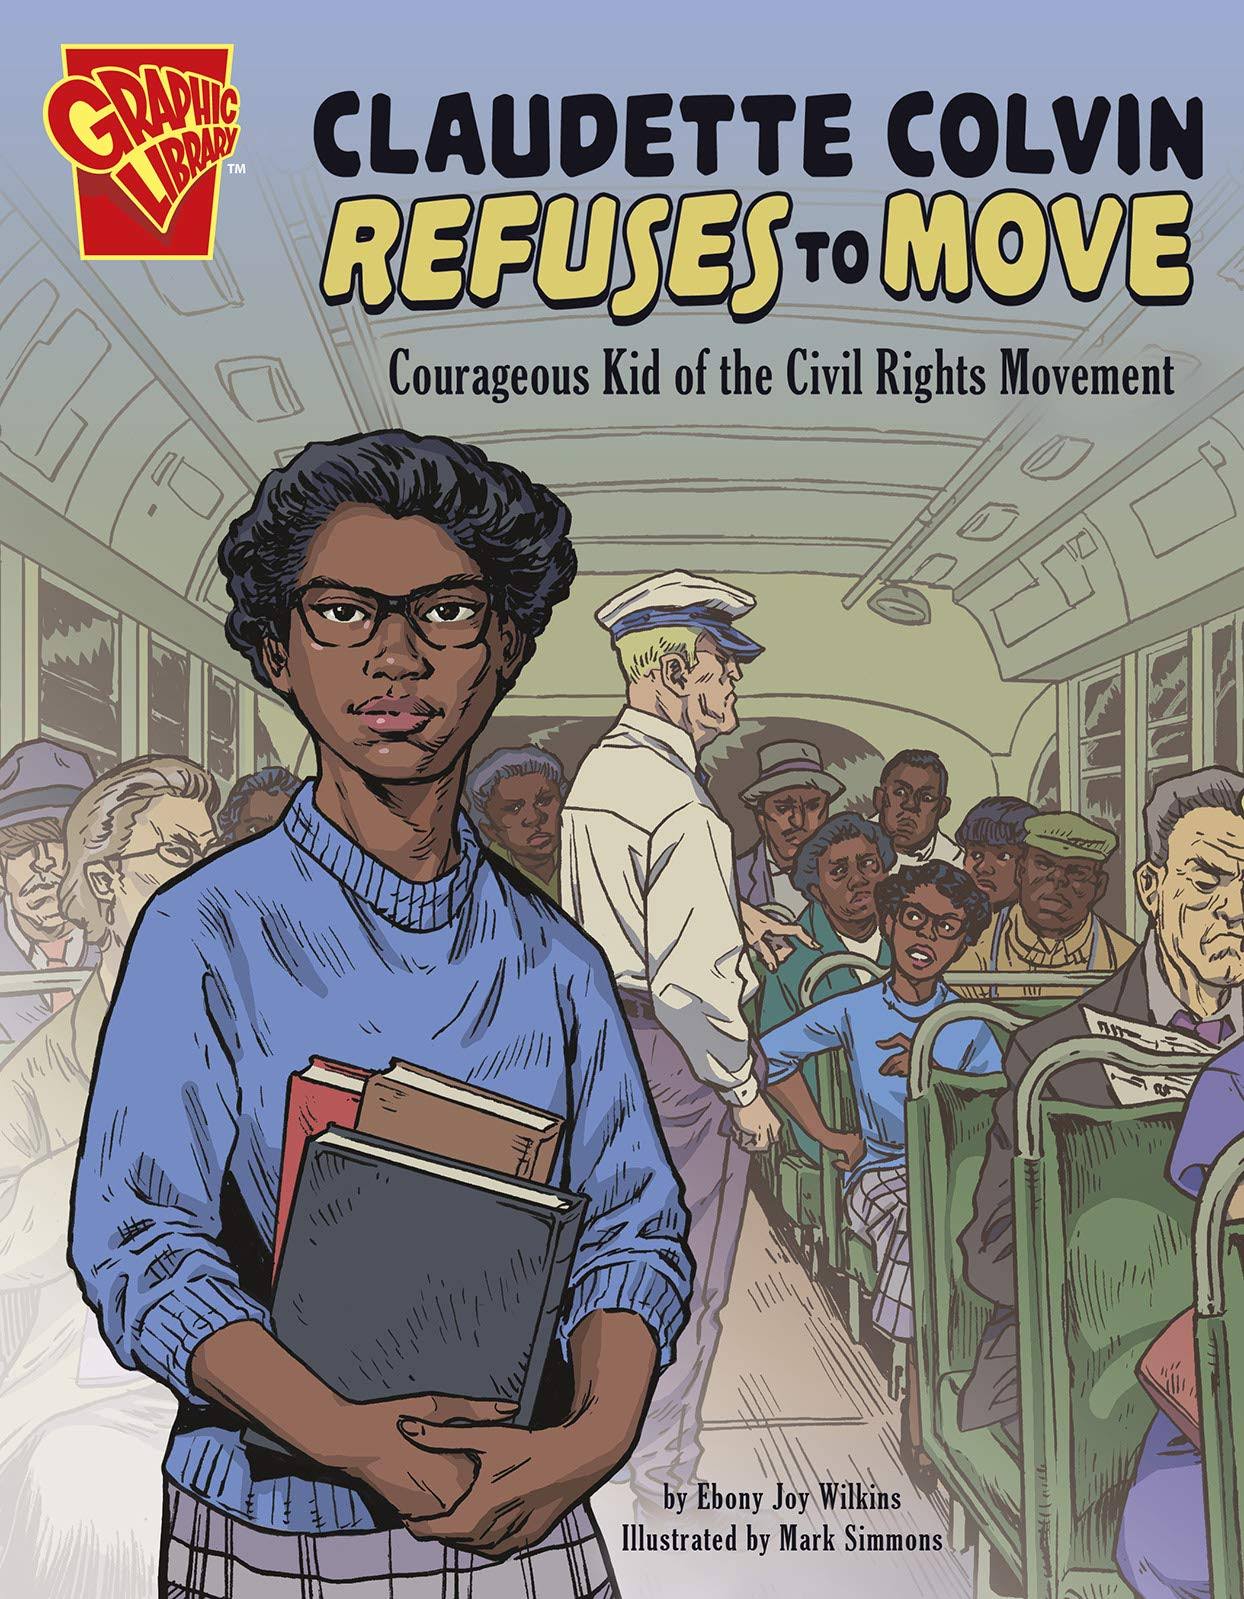 Claudette Colvin Refuses to Move: Courageous Kid of the Civil Rights Movement [Book]